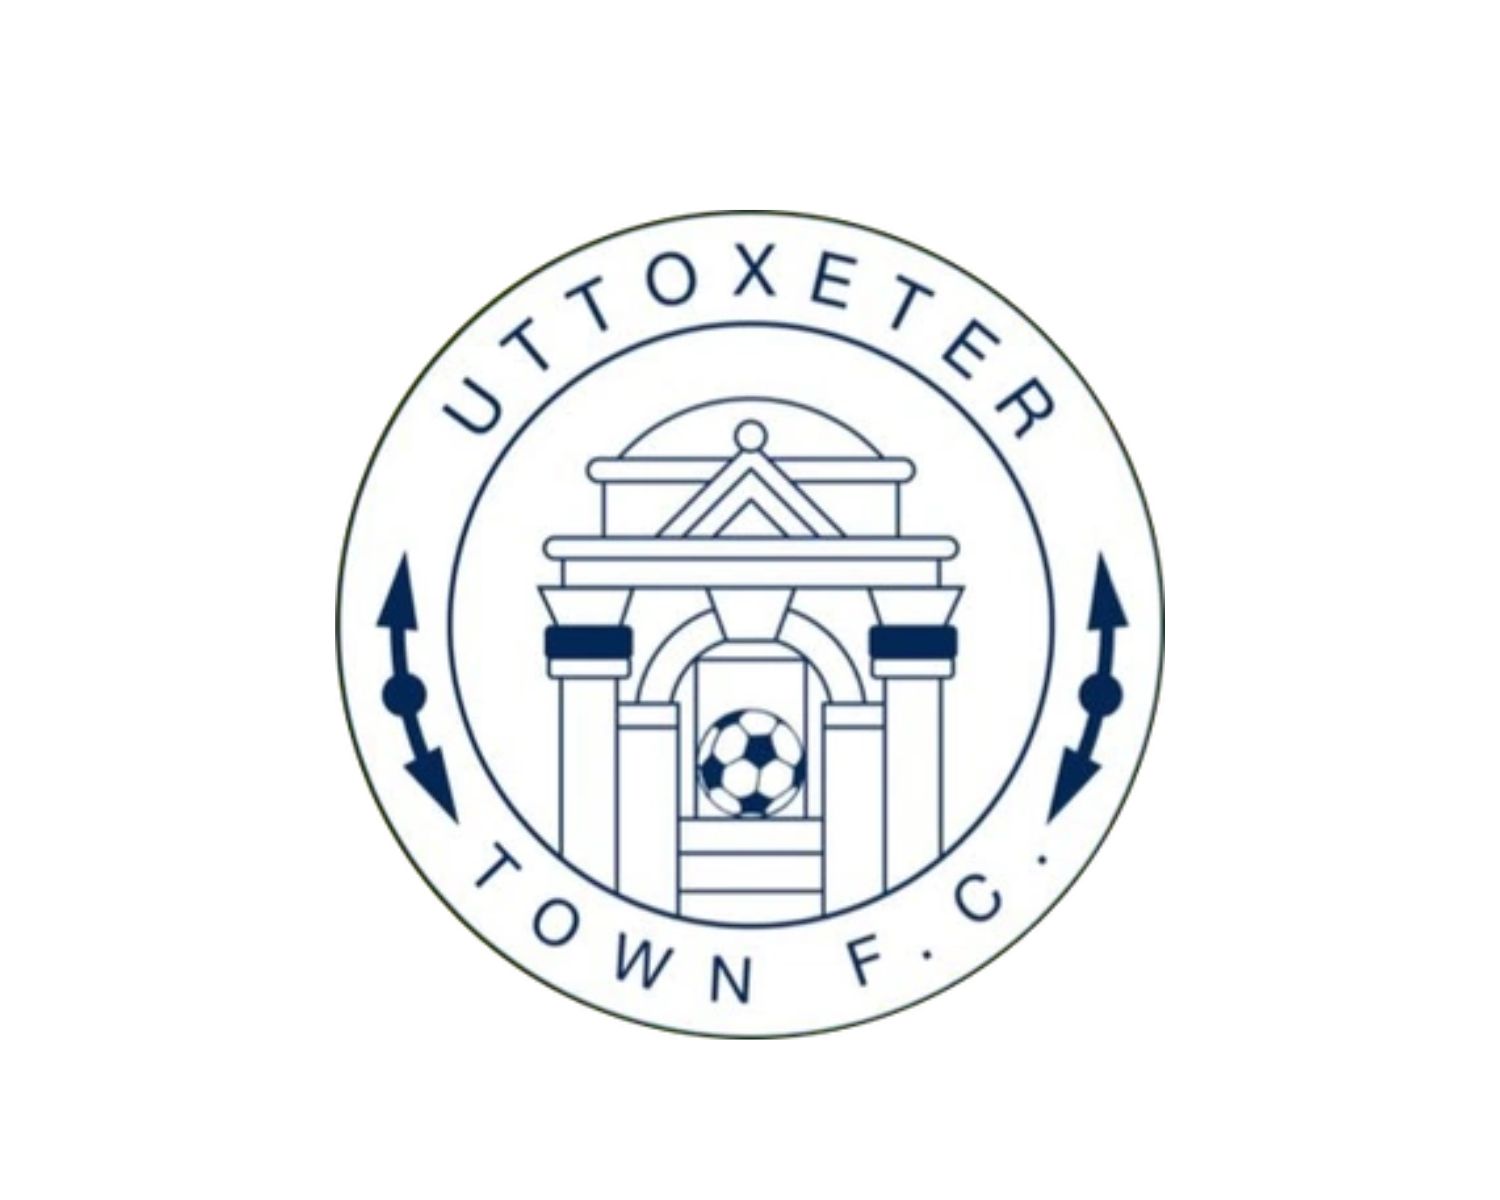 uttoxeter-town-fc-11-football-club-facts